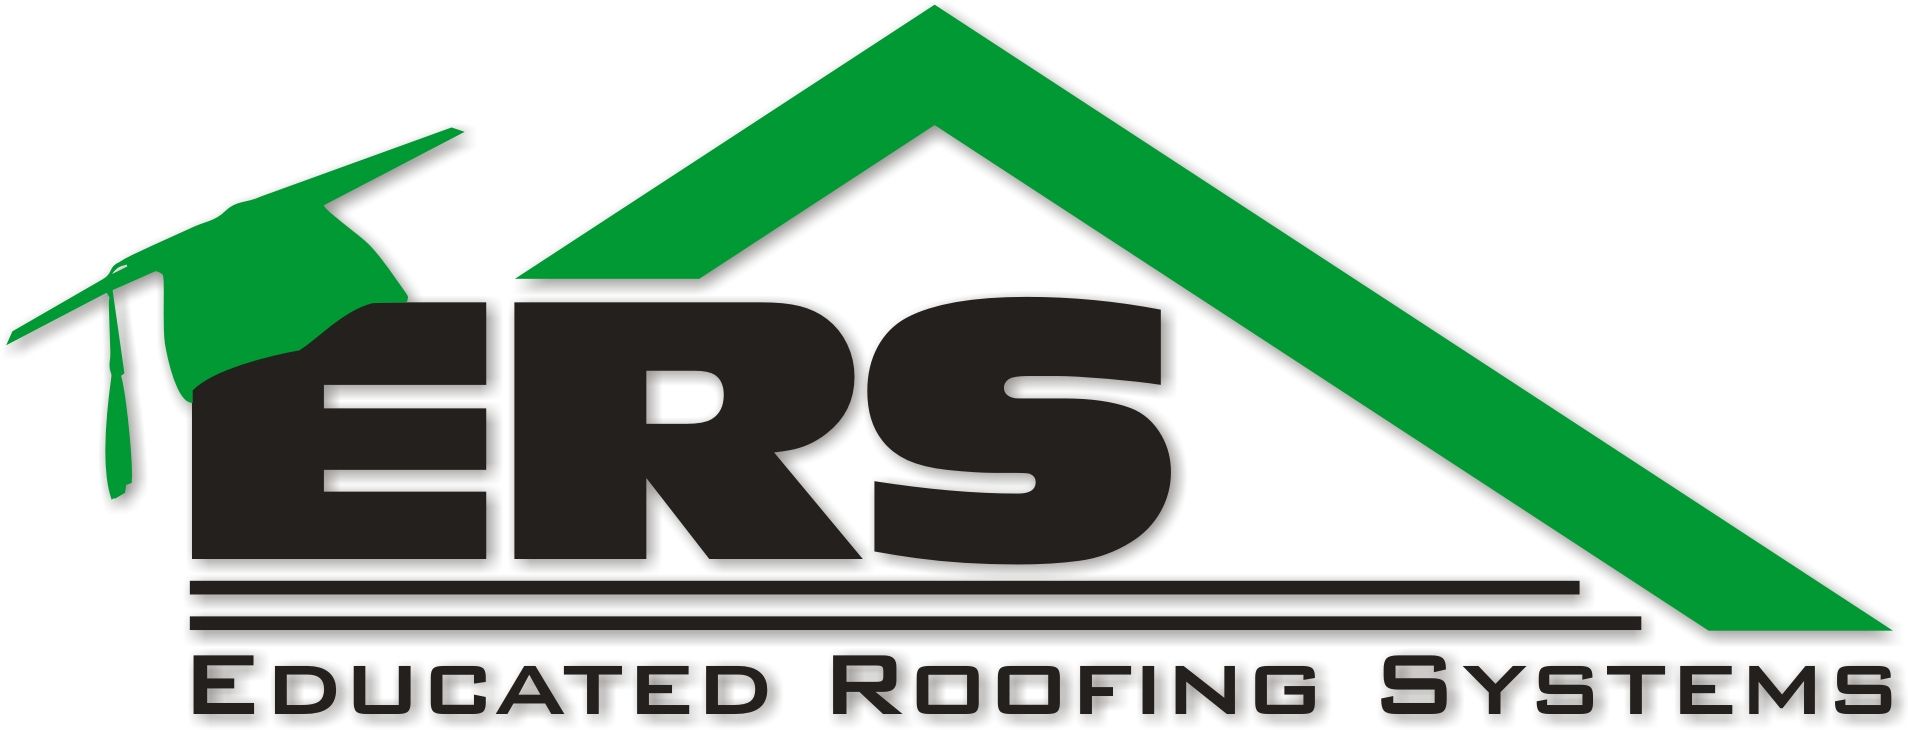 Educated Roofing Systems